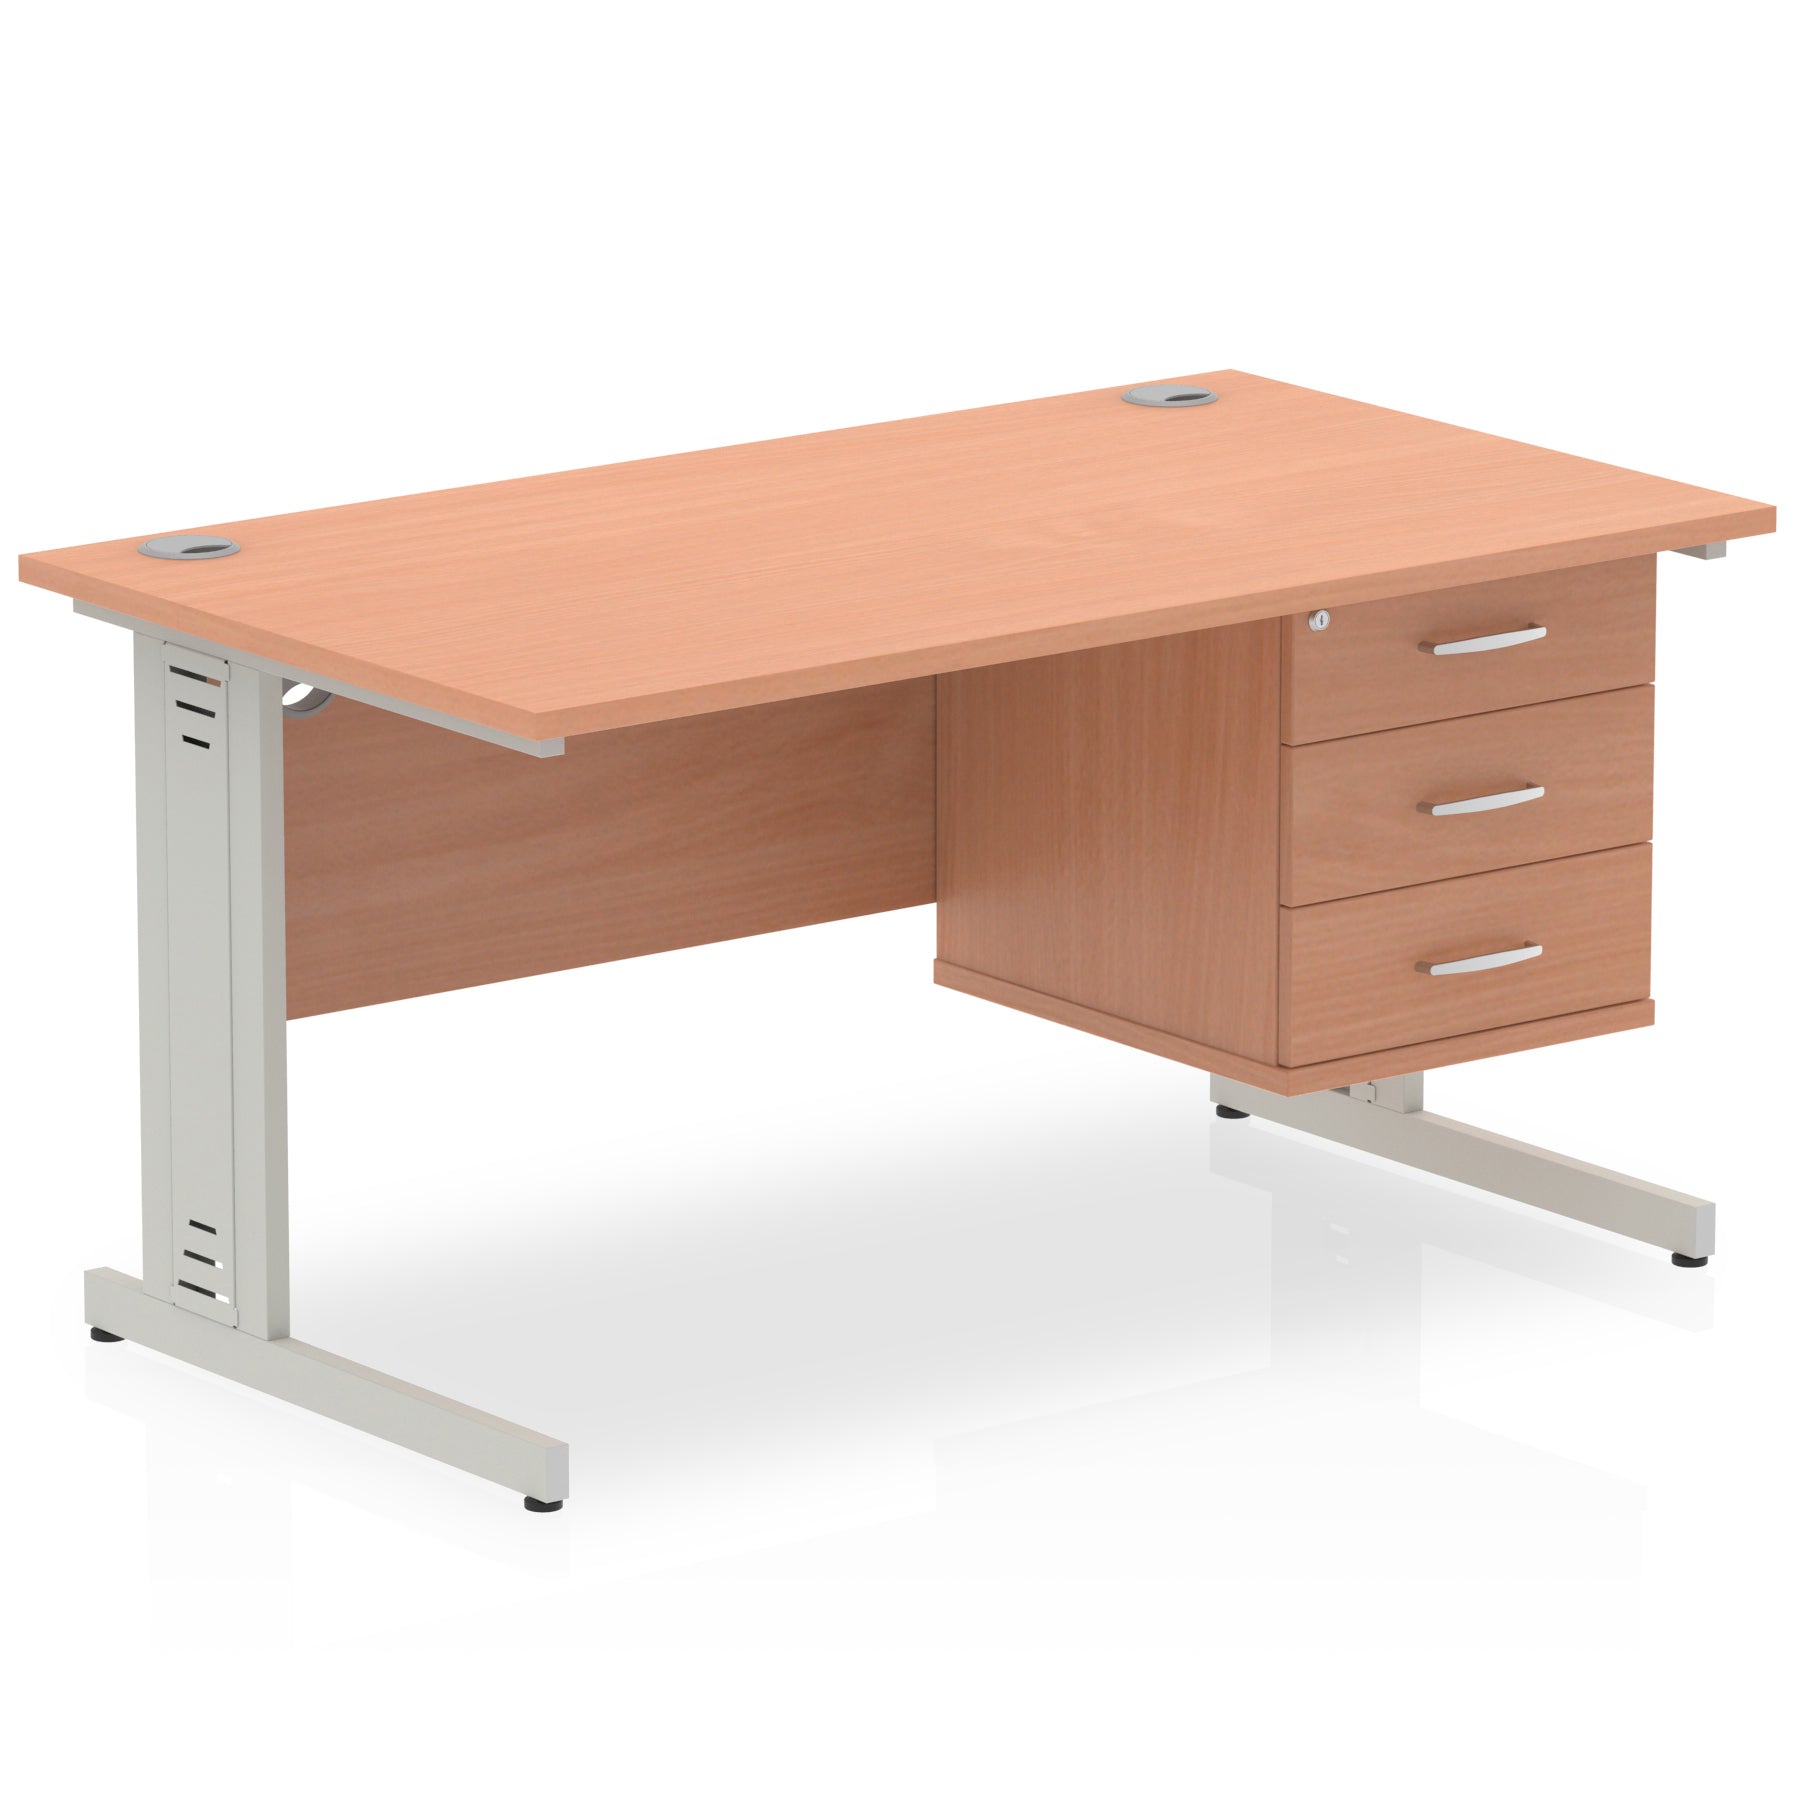 Impulse 1400mm Cable Managed Straight Desk w/ Fixed Pedestal - MFC Rectangular, Self-Assembly, 5-Year Guarantee, 2/3 Lockable Drawers